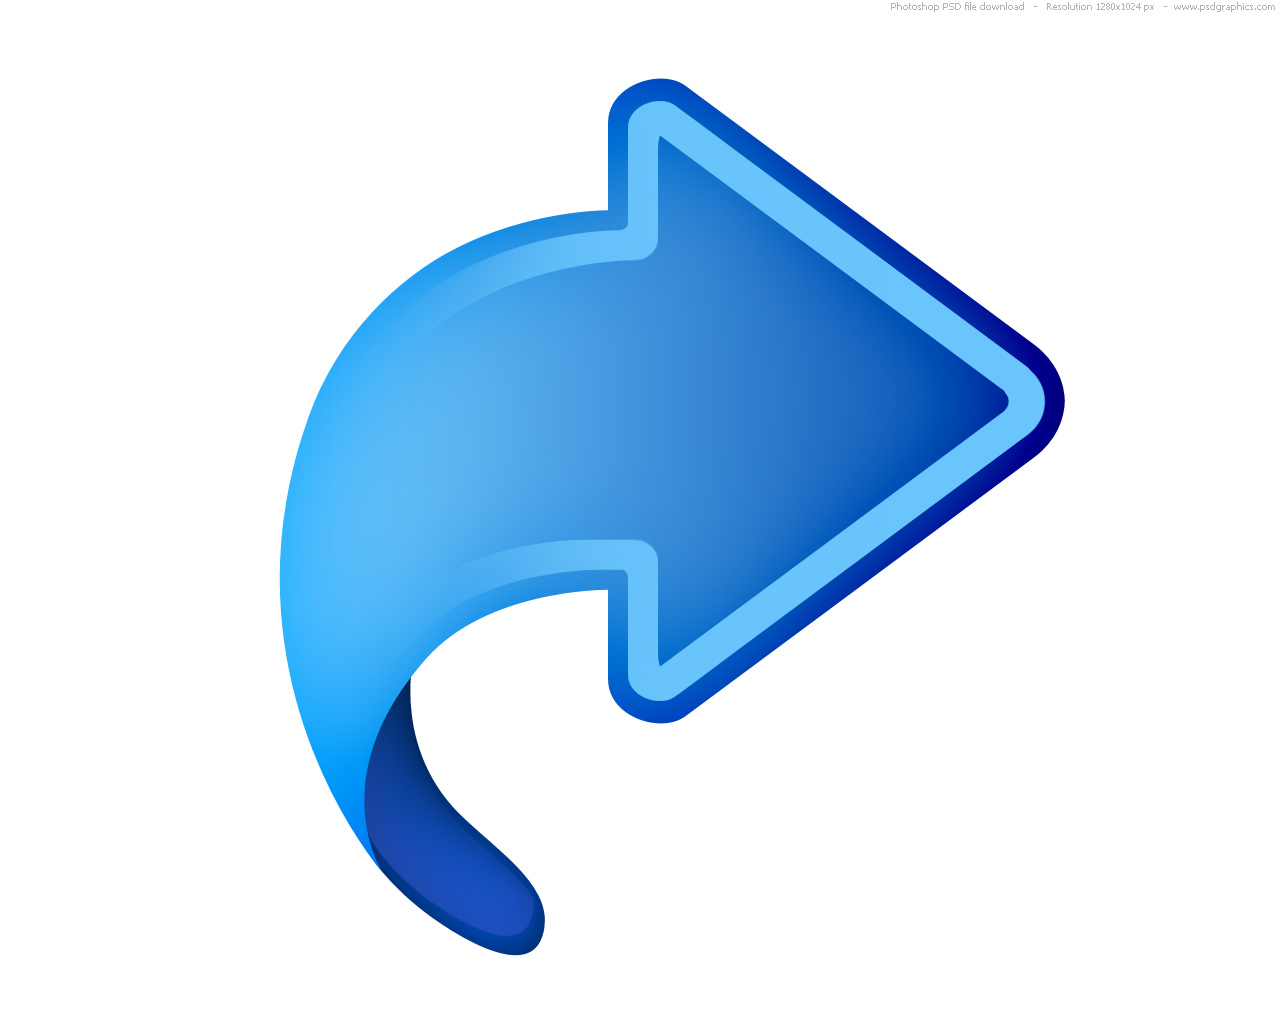 Up, down, left and right arrows, blue web icons | PSDGraphics